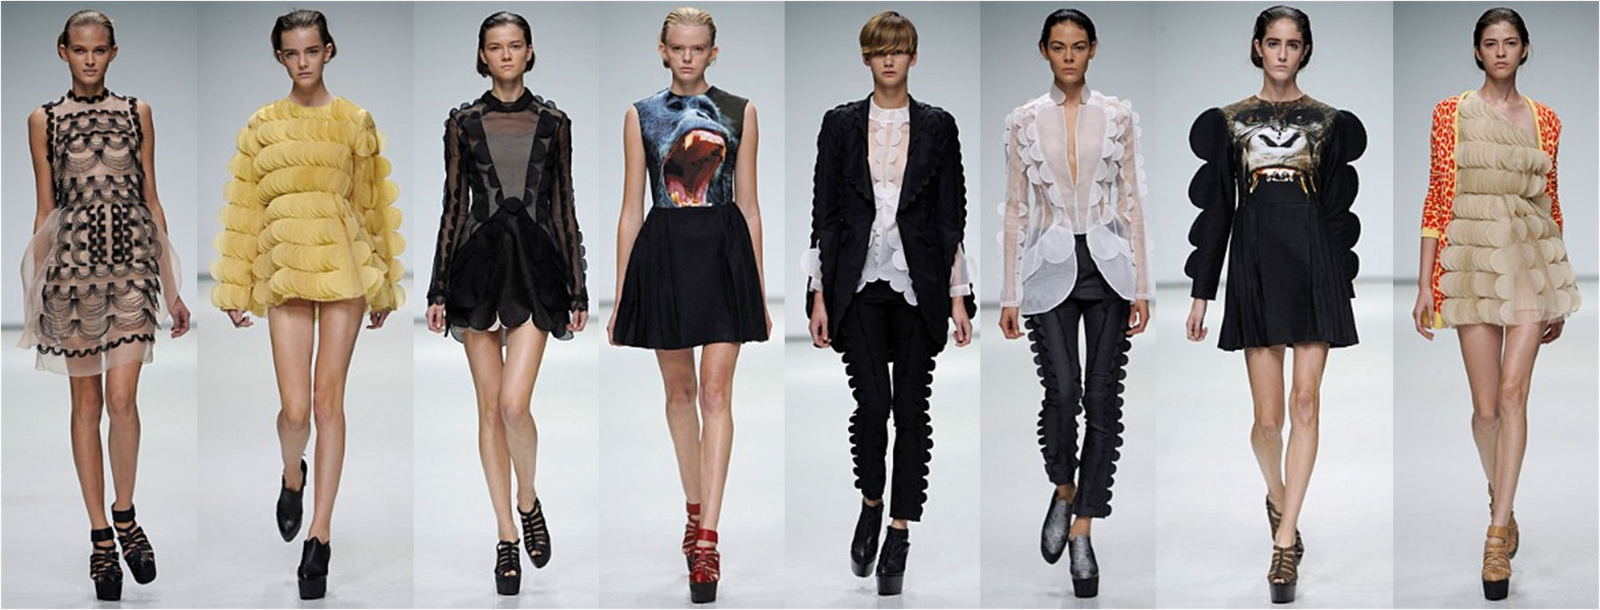 Scatterrbrained A Blog For The Fashionably Inclined Christopher Kane